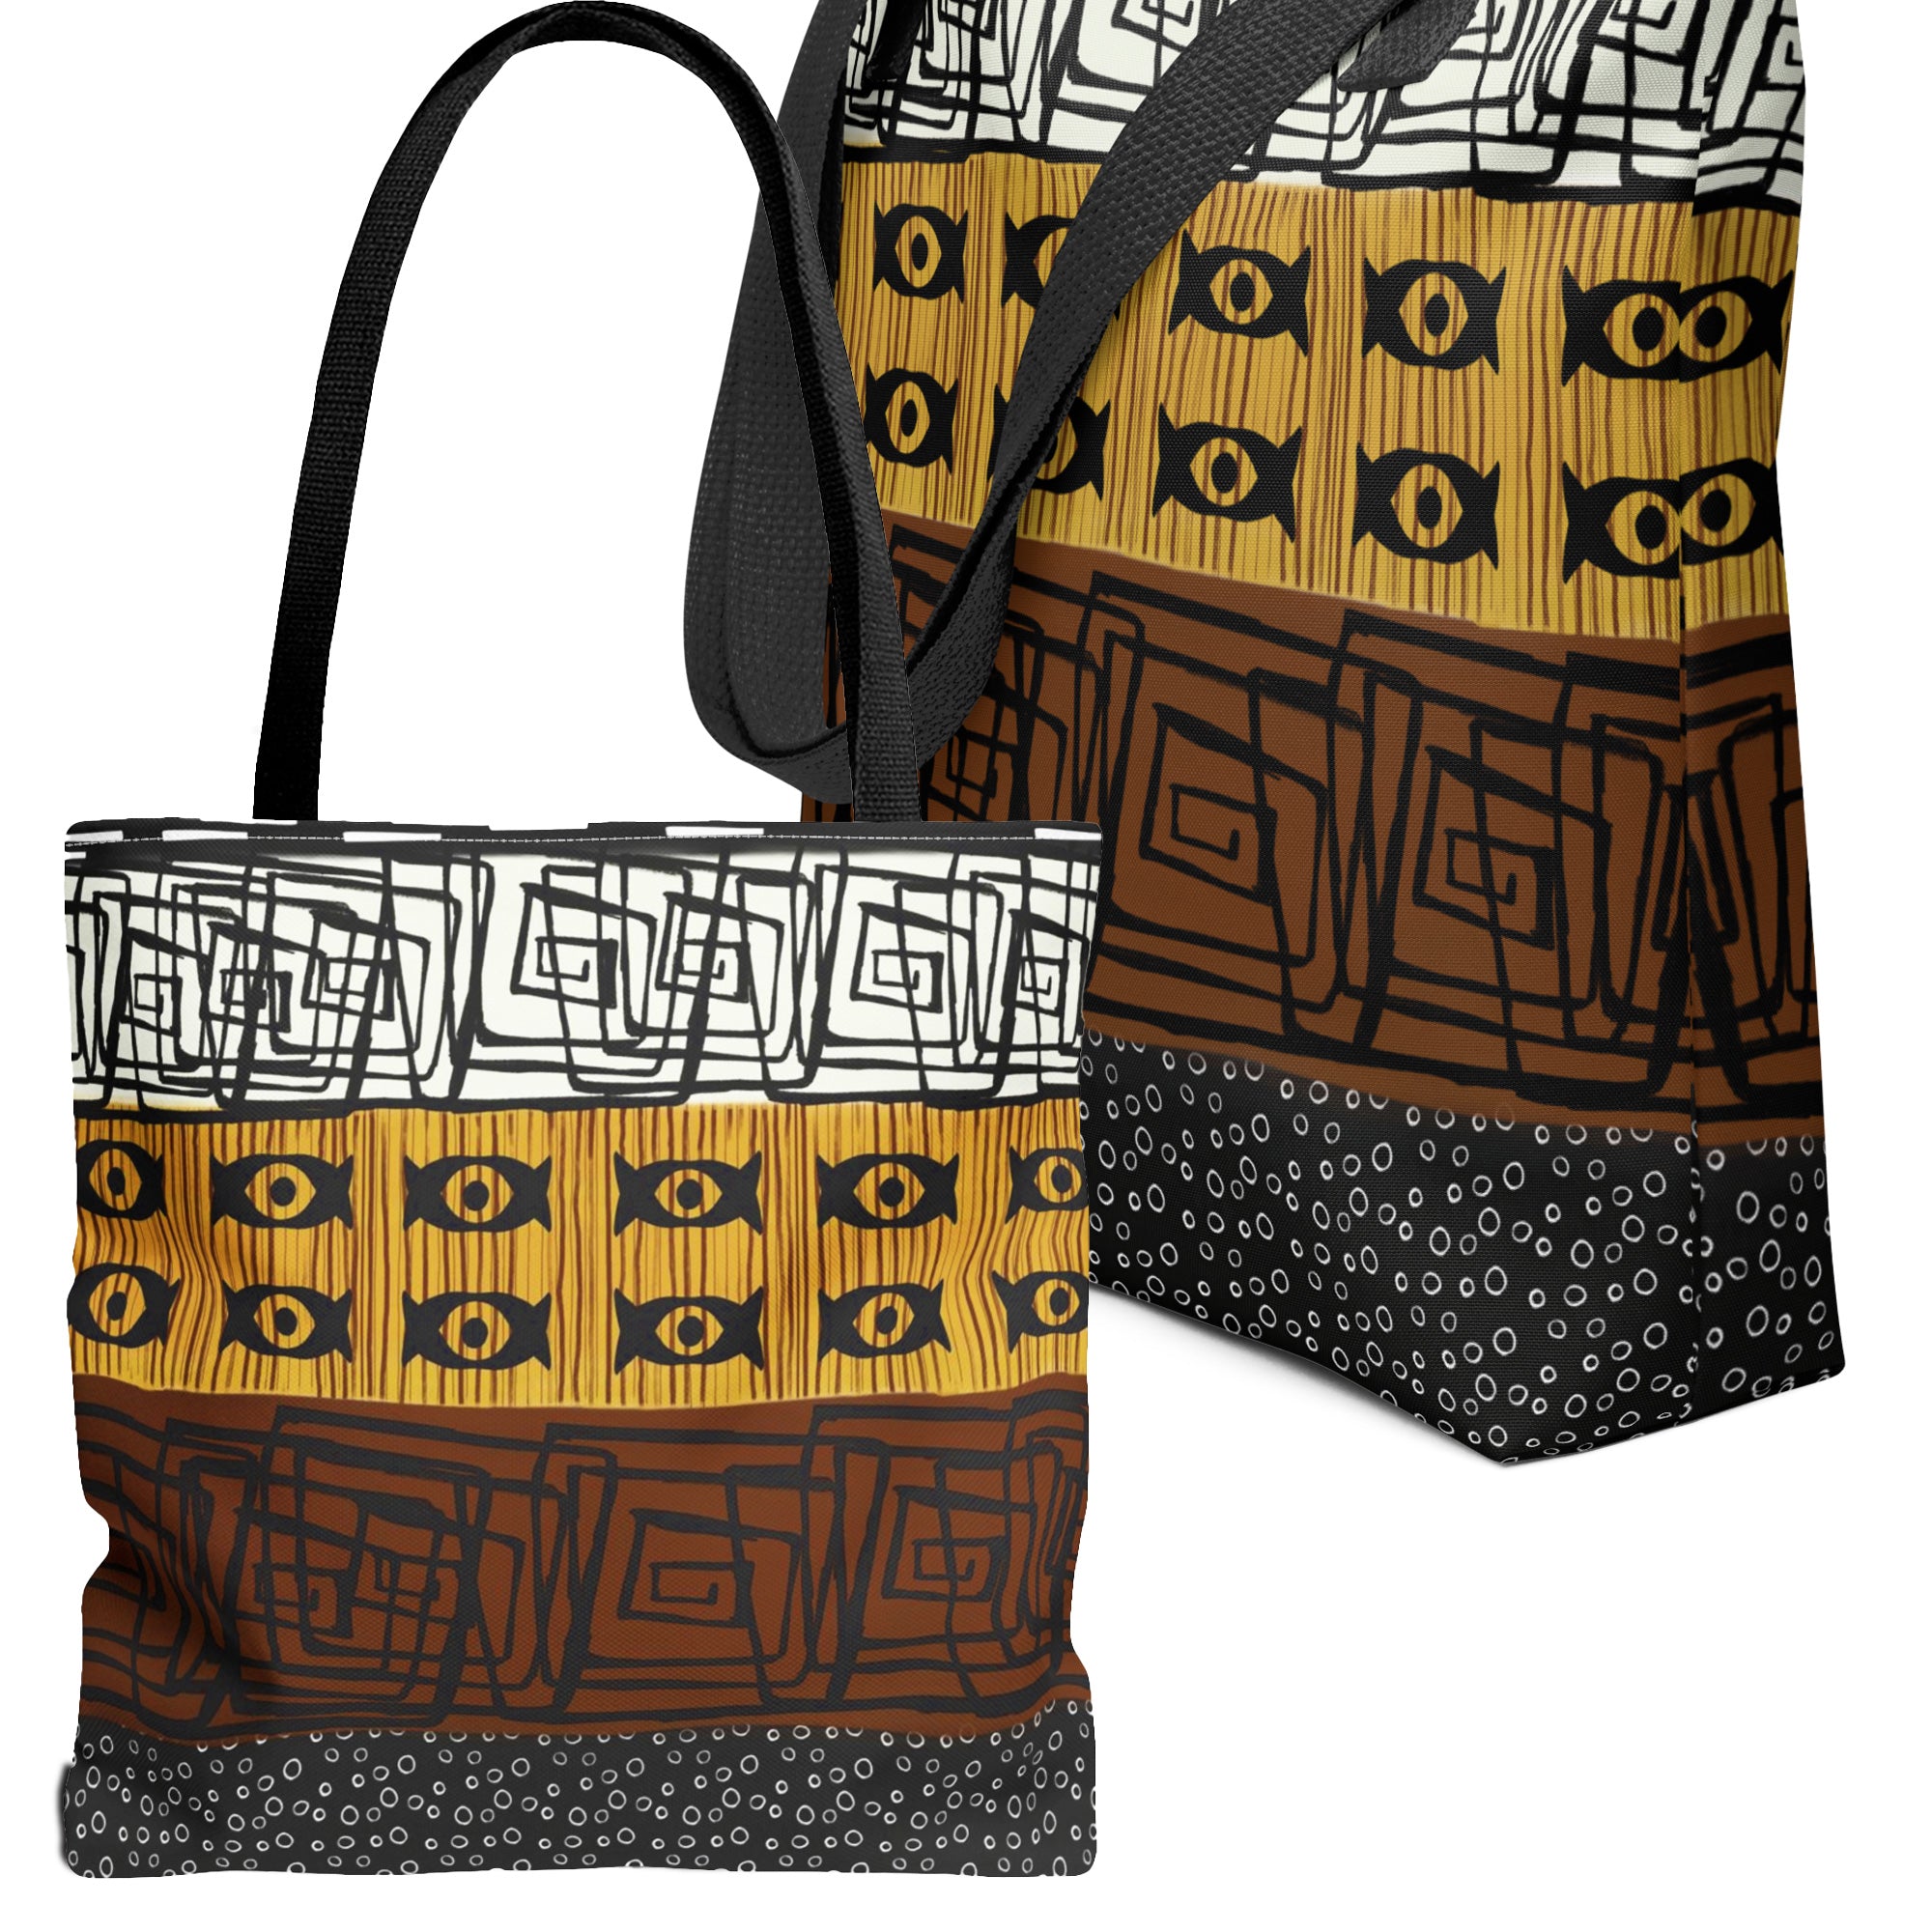 African Print Tote Bag - front and side views.